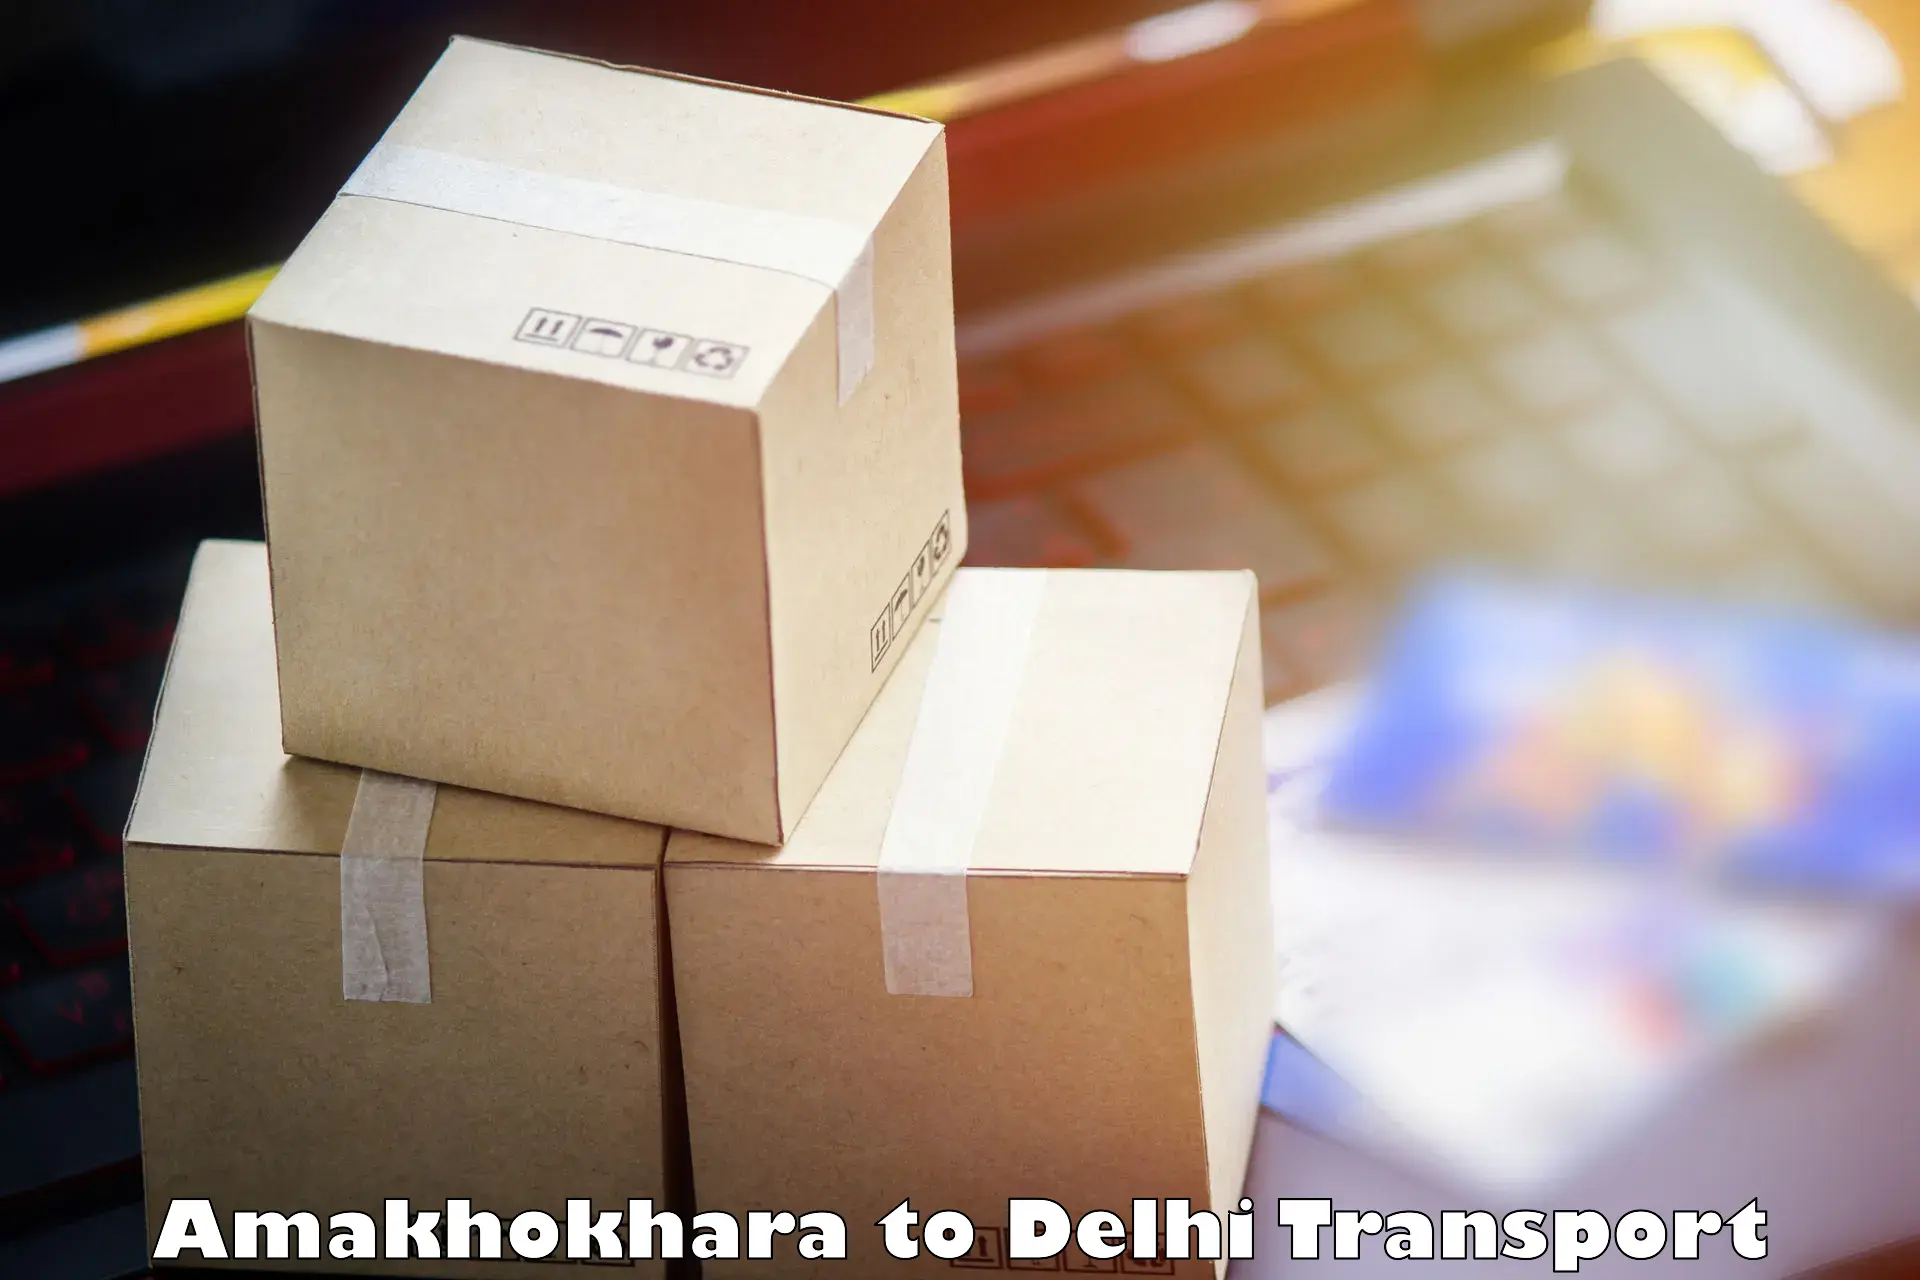 Package delivery services Amakhokhara to Burari